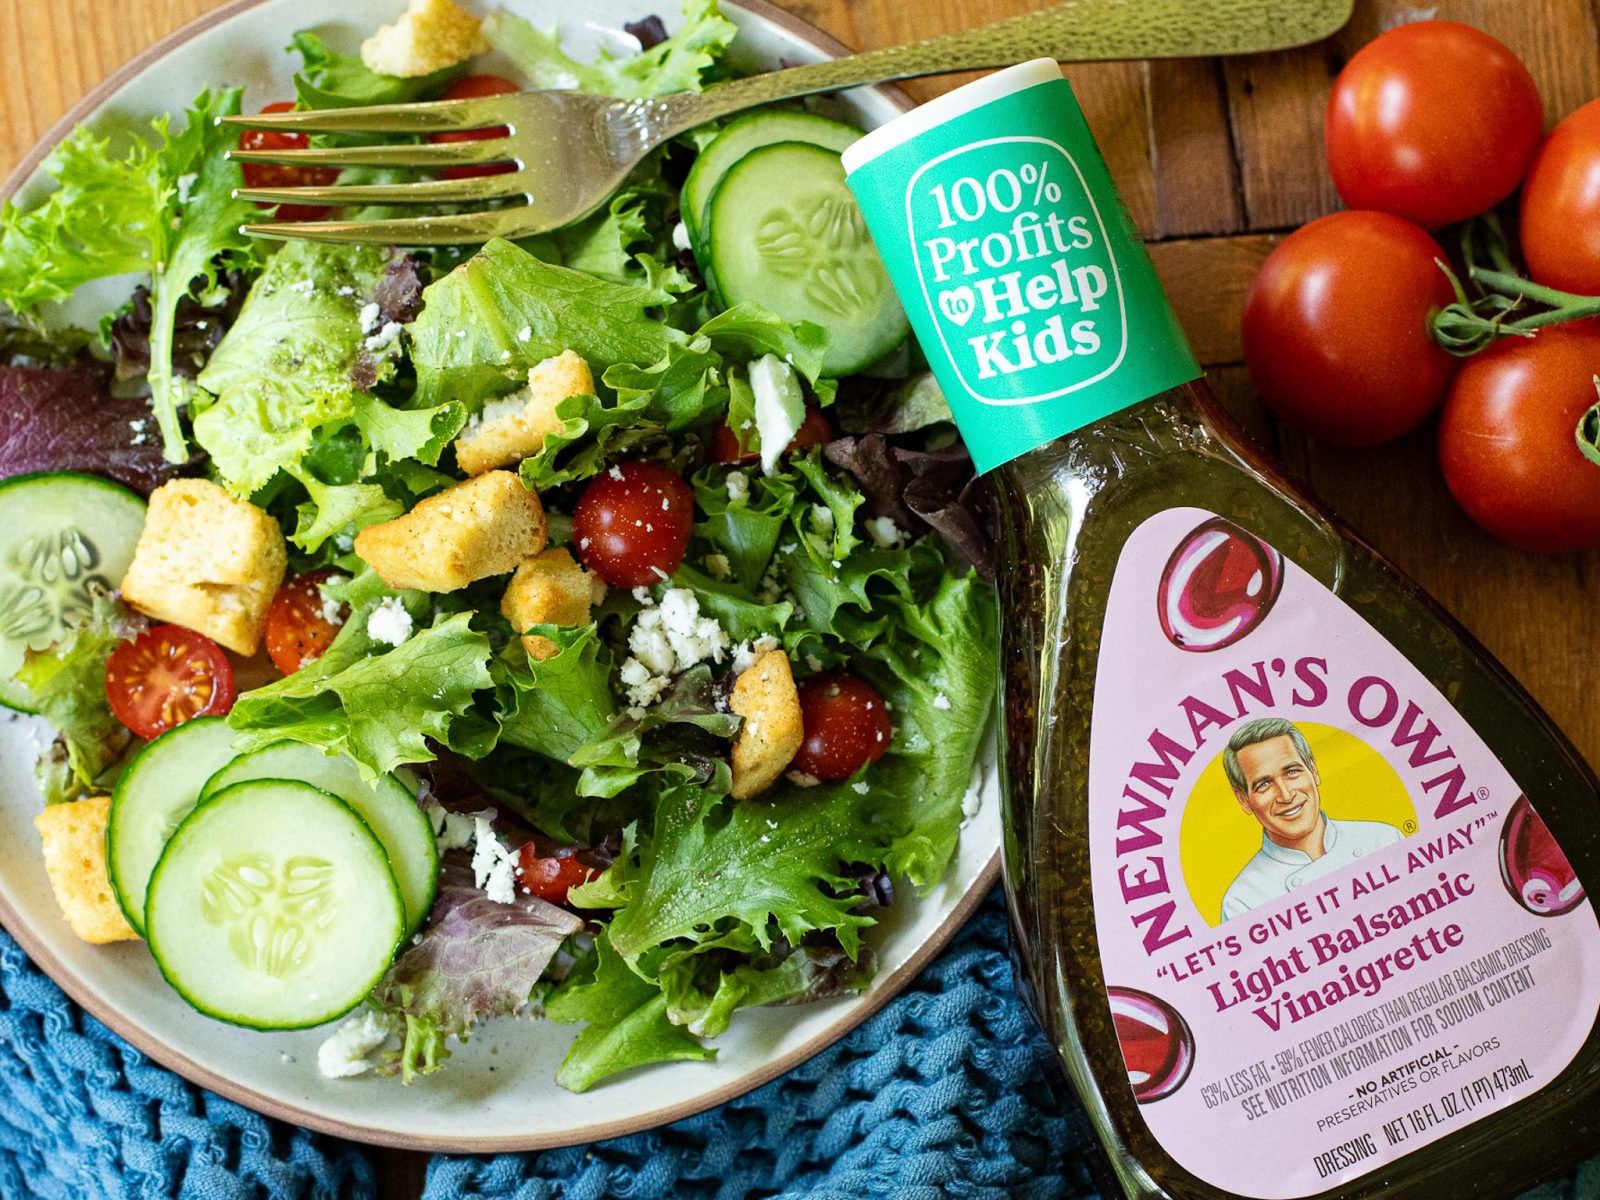 Get The Bottles Of Newman’s Own Dressing For Just $2.49 At Kroger